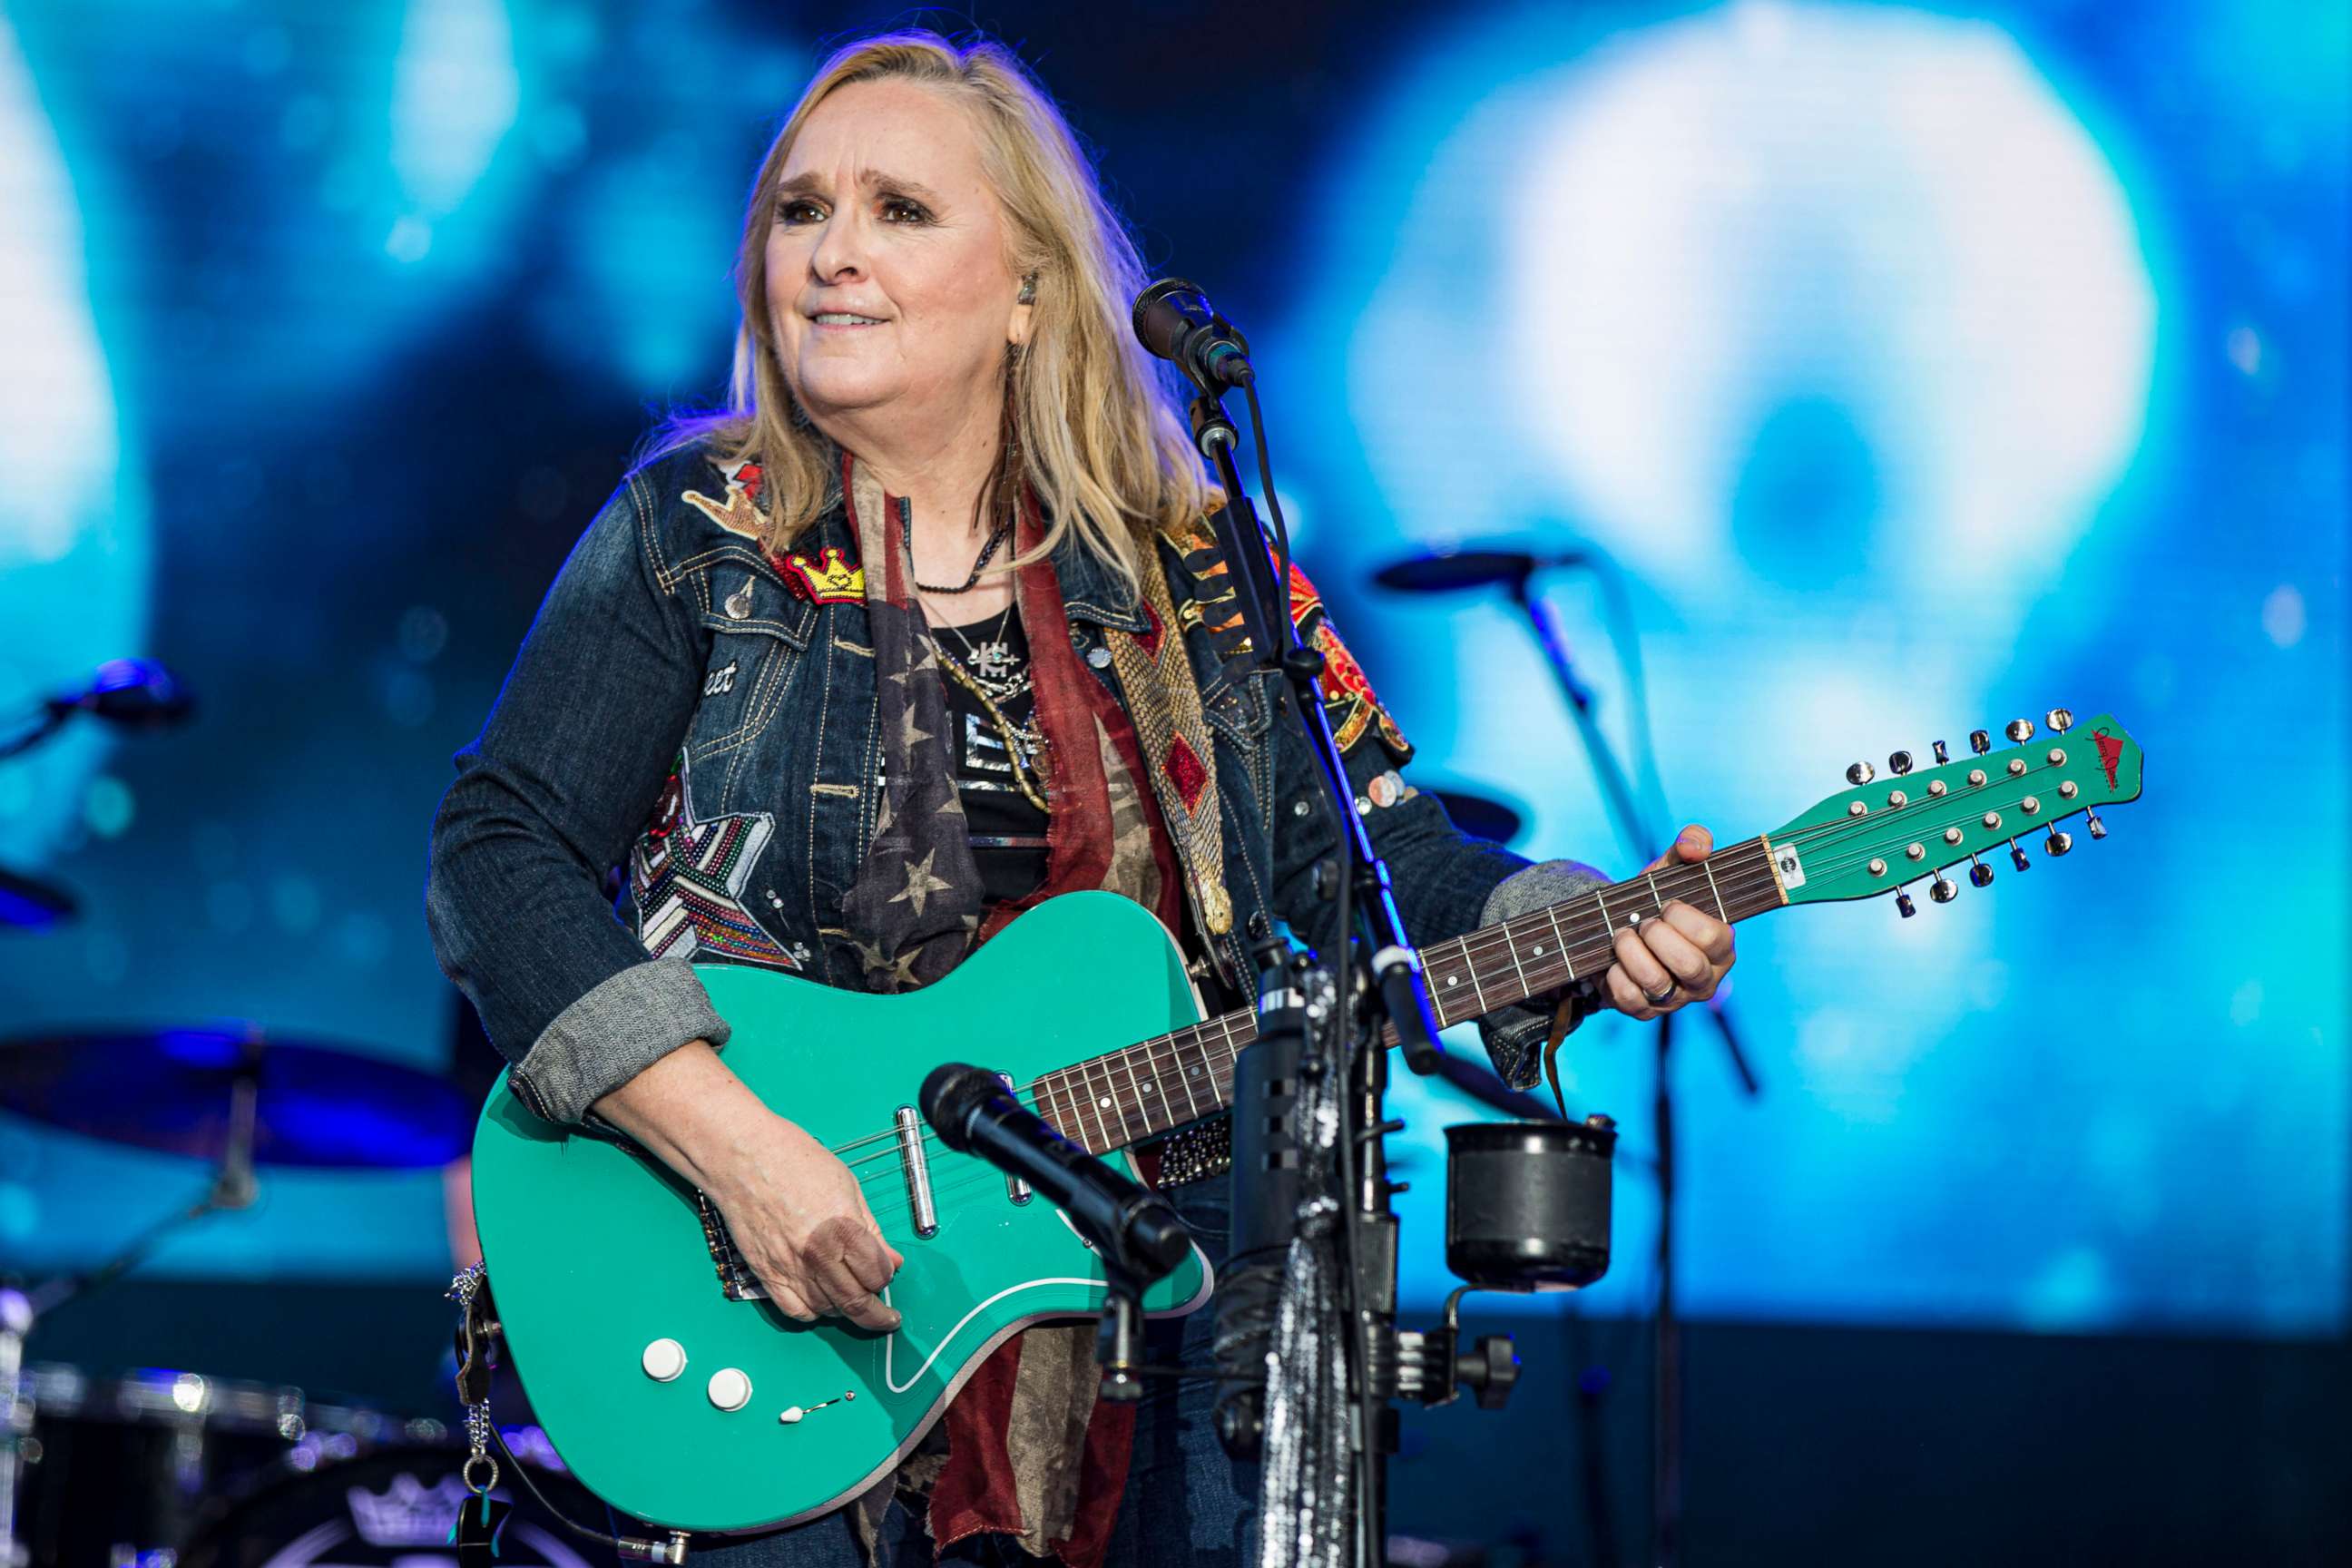 PHOTO: Melissa Etheridge performs on stage at San Diego Pride Festival 2019 on July 14, 2019 in San Diego.